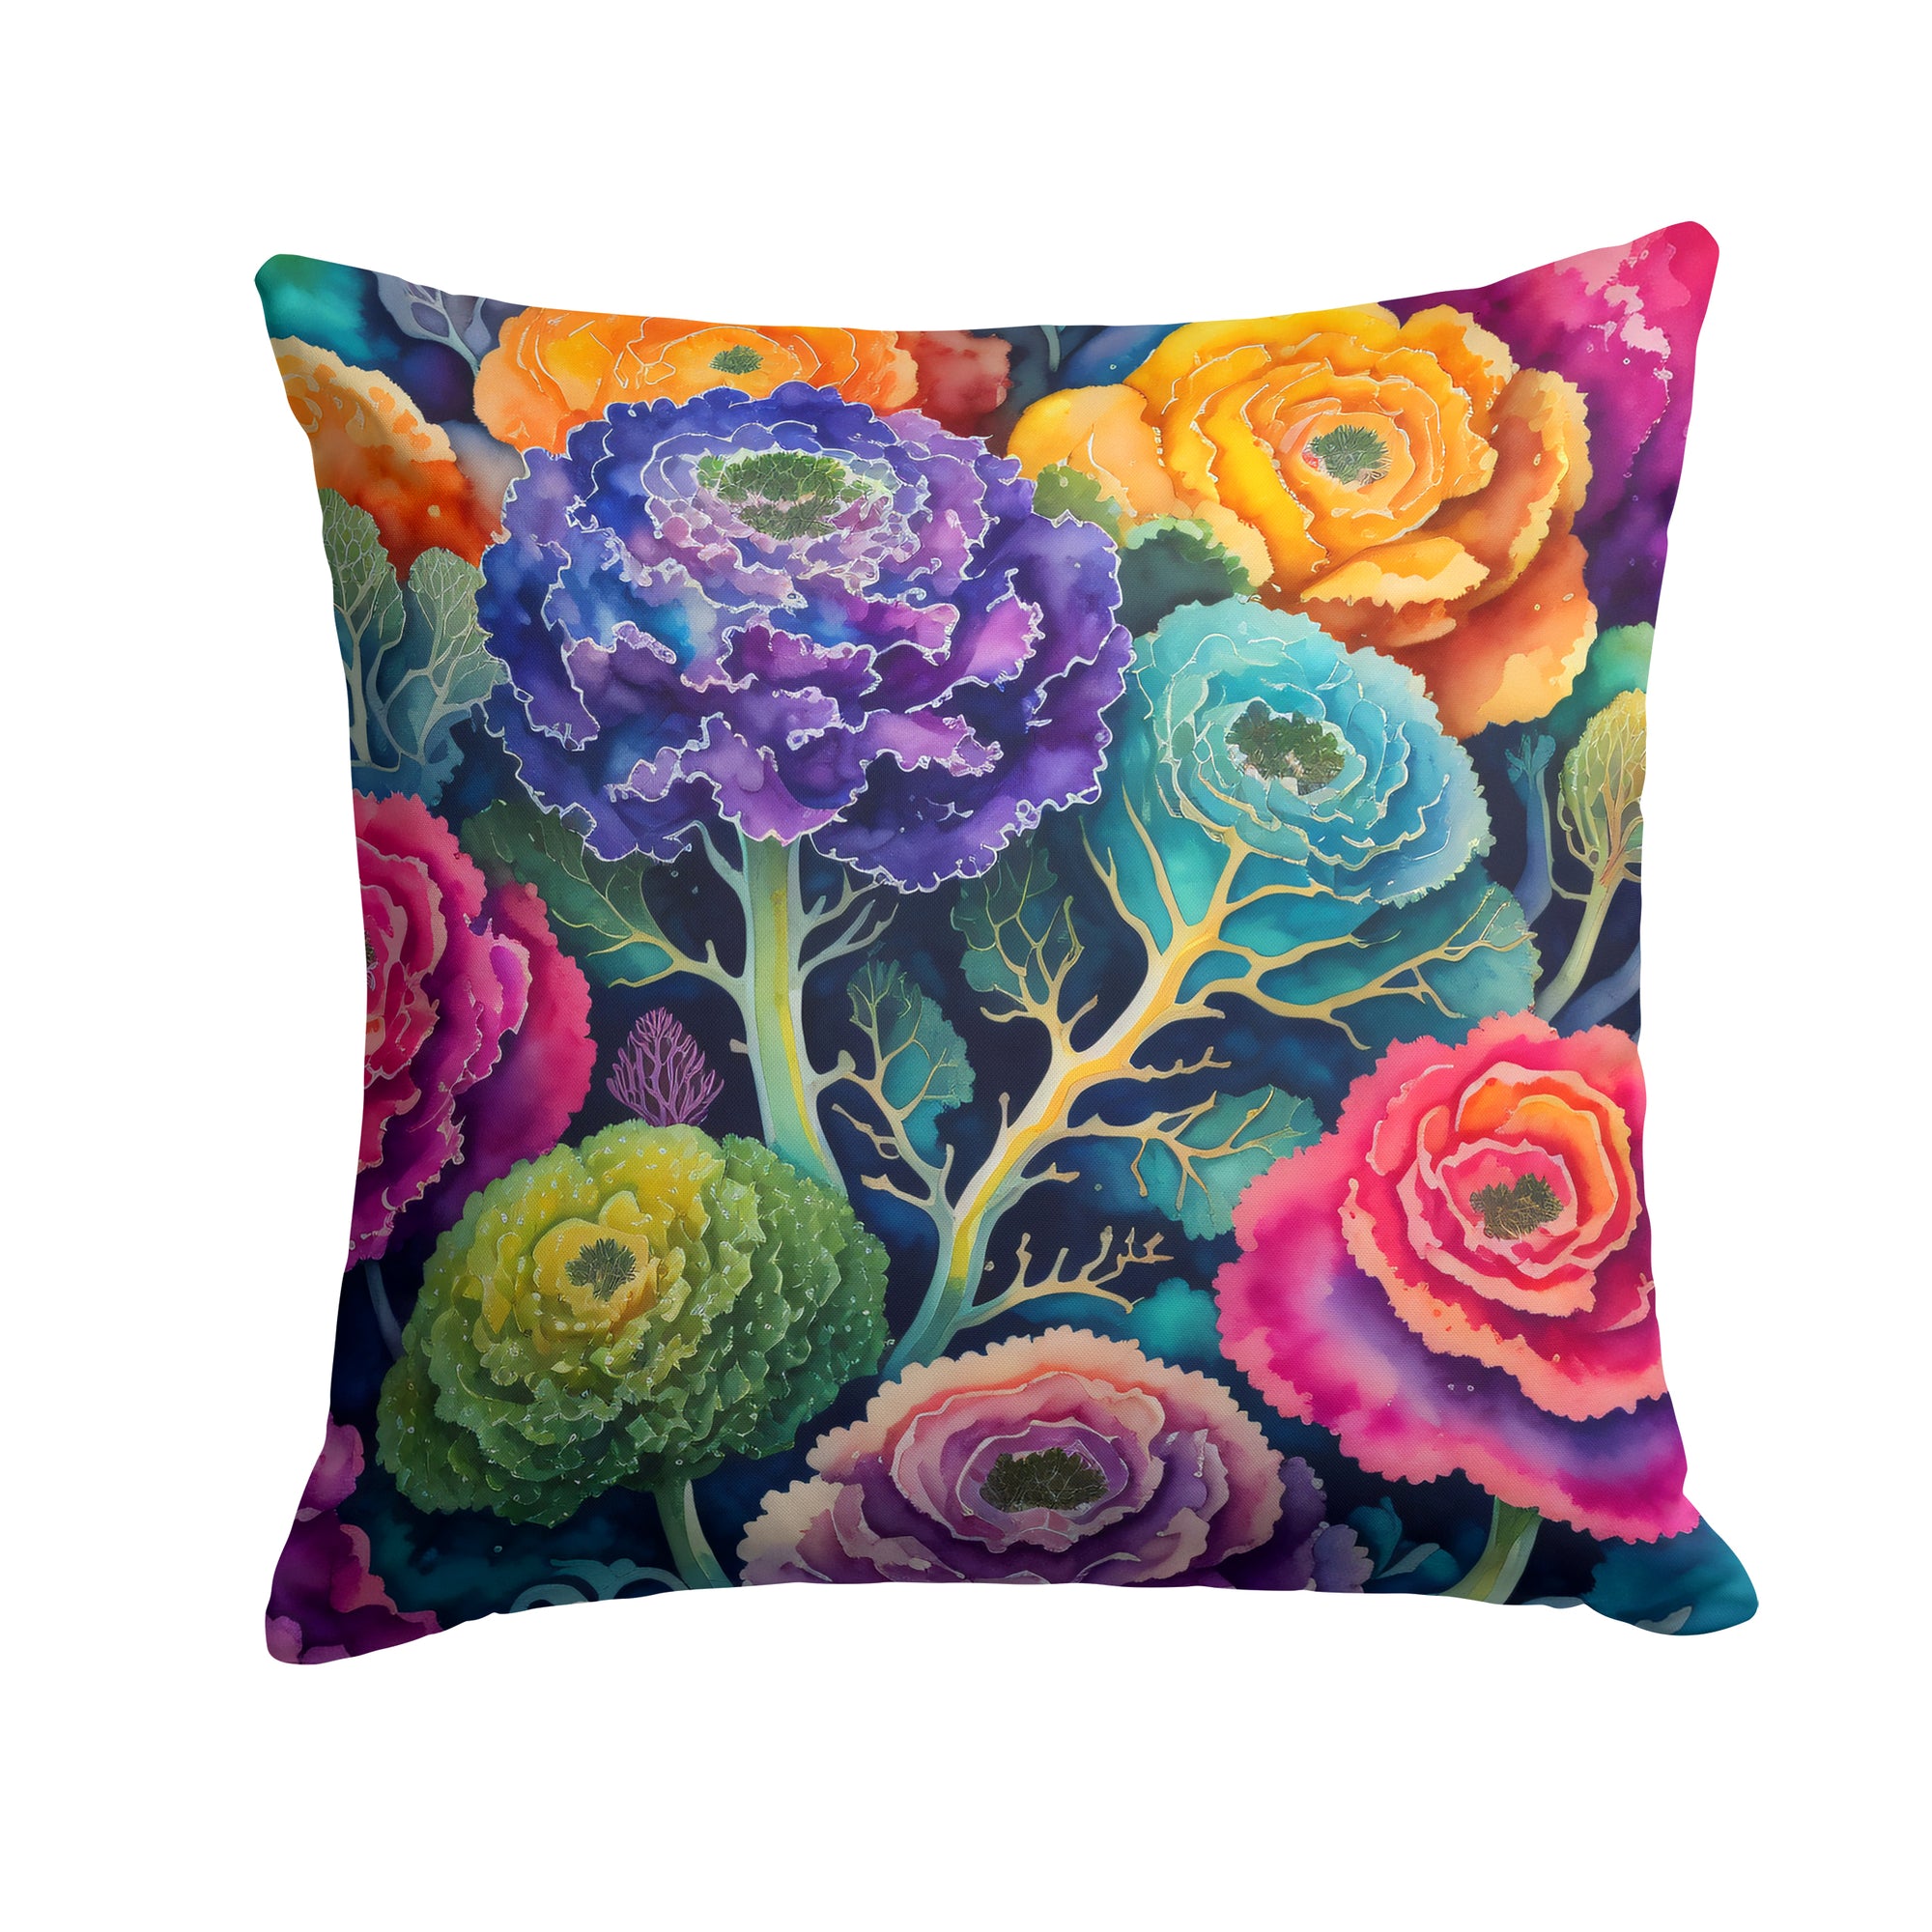 Buy this Colorful Ornamental Kale Fabric Decorative Pillow